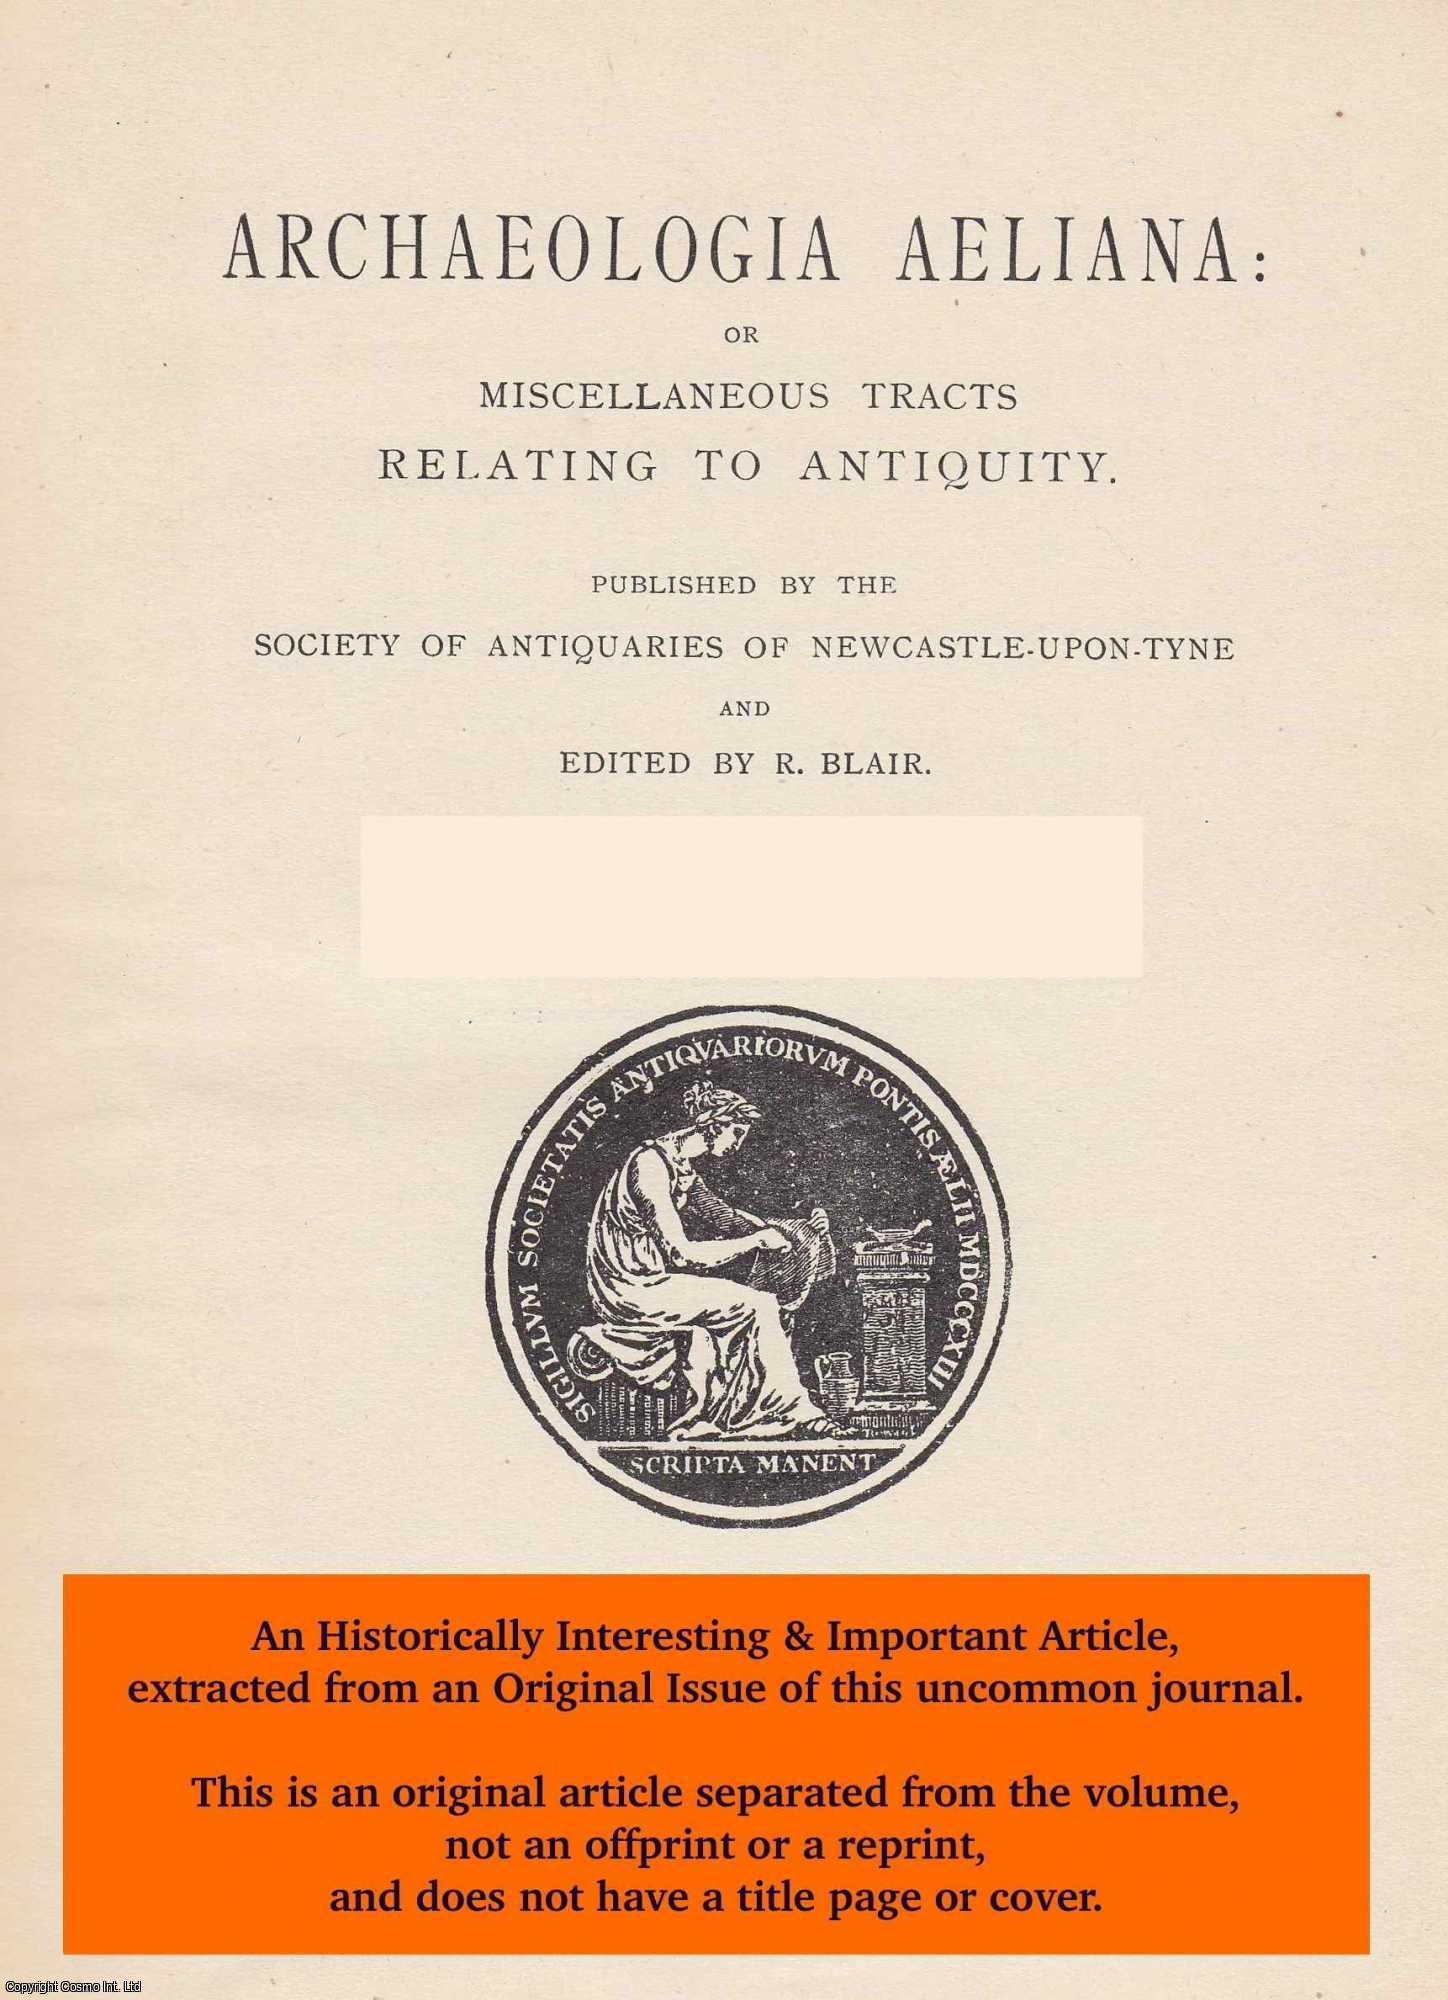 Barbara Harbottle & Peter Salway & B. J. N. Edwards, Barbara - Nafferton Castle. Second Report. An original article from The Archaeologia Aeliana: or Miscellaneous Tracts Relating to Antiquity, 1961.